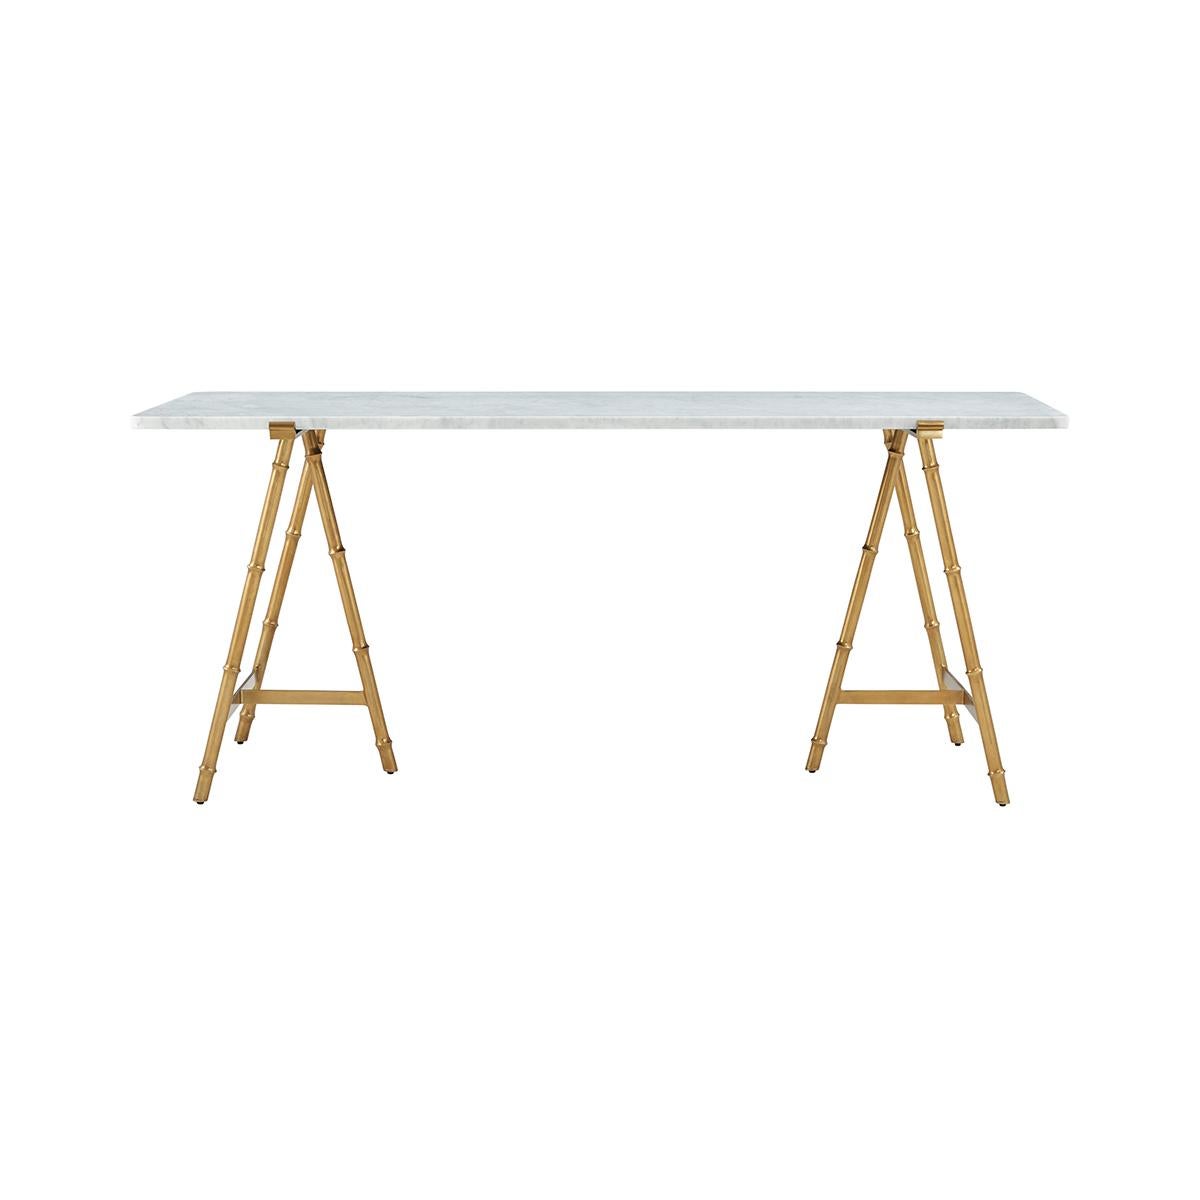 Slender lines form a light and airy design in this modern table. A graceful combination of white bianco marble atop an organic faux bois base in a satin bronze finish.

Dimensions: 72